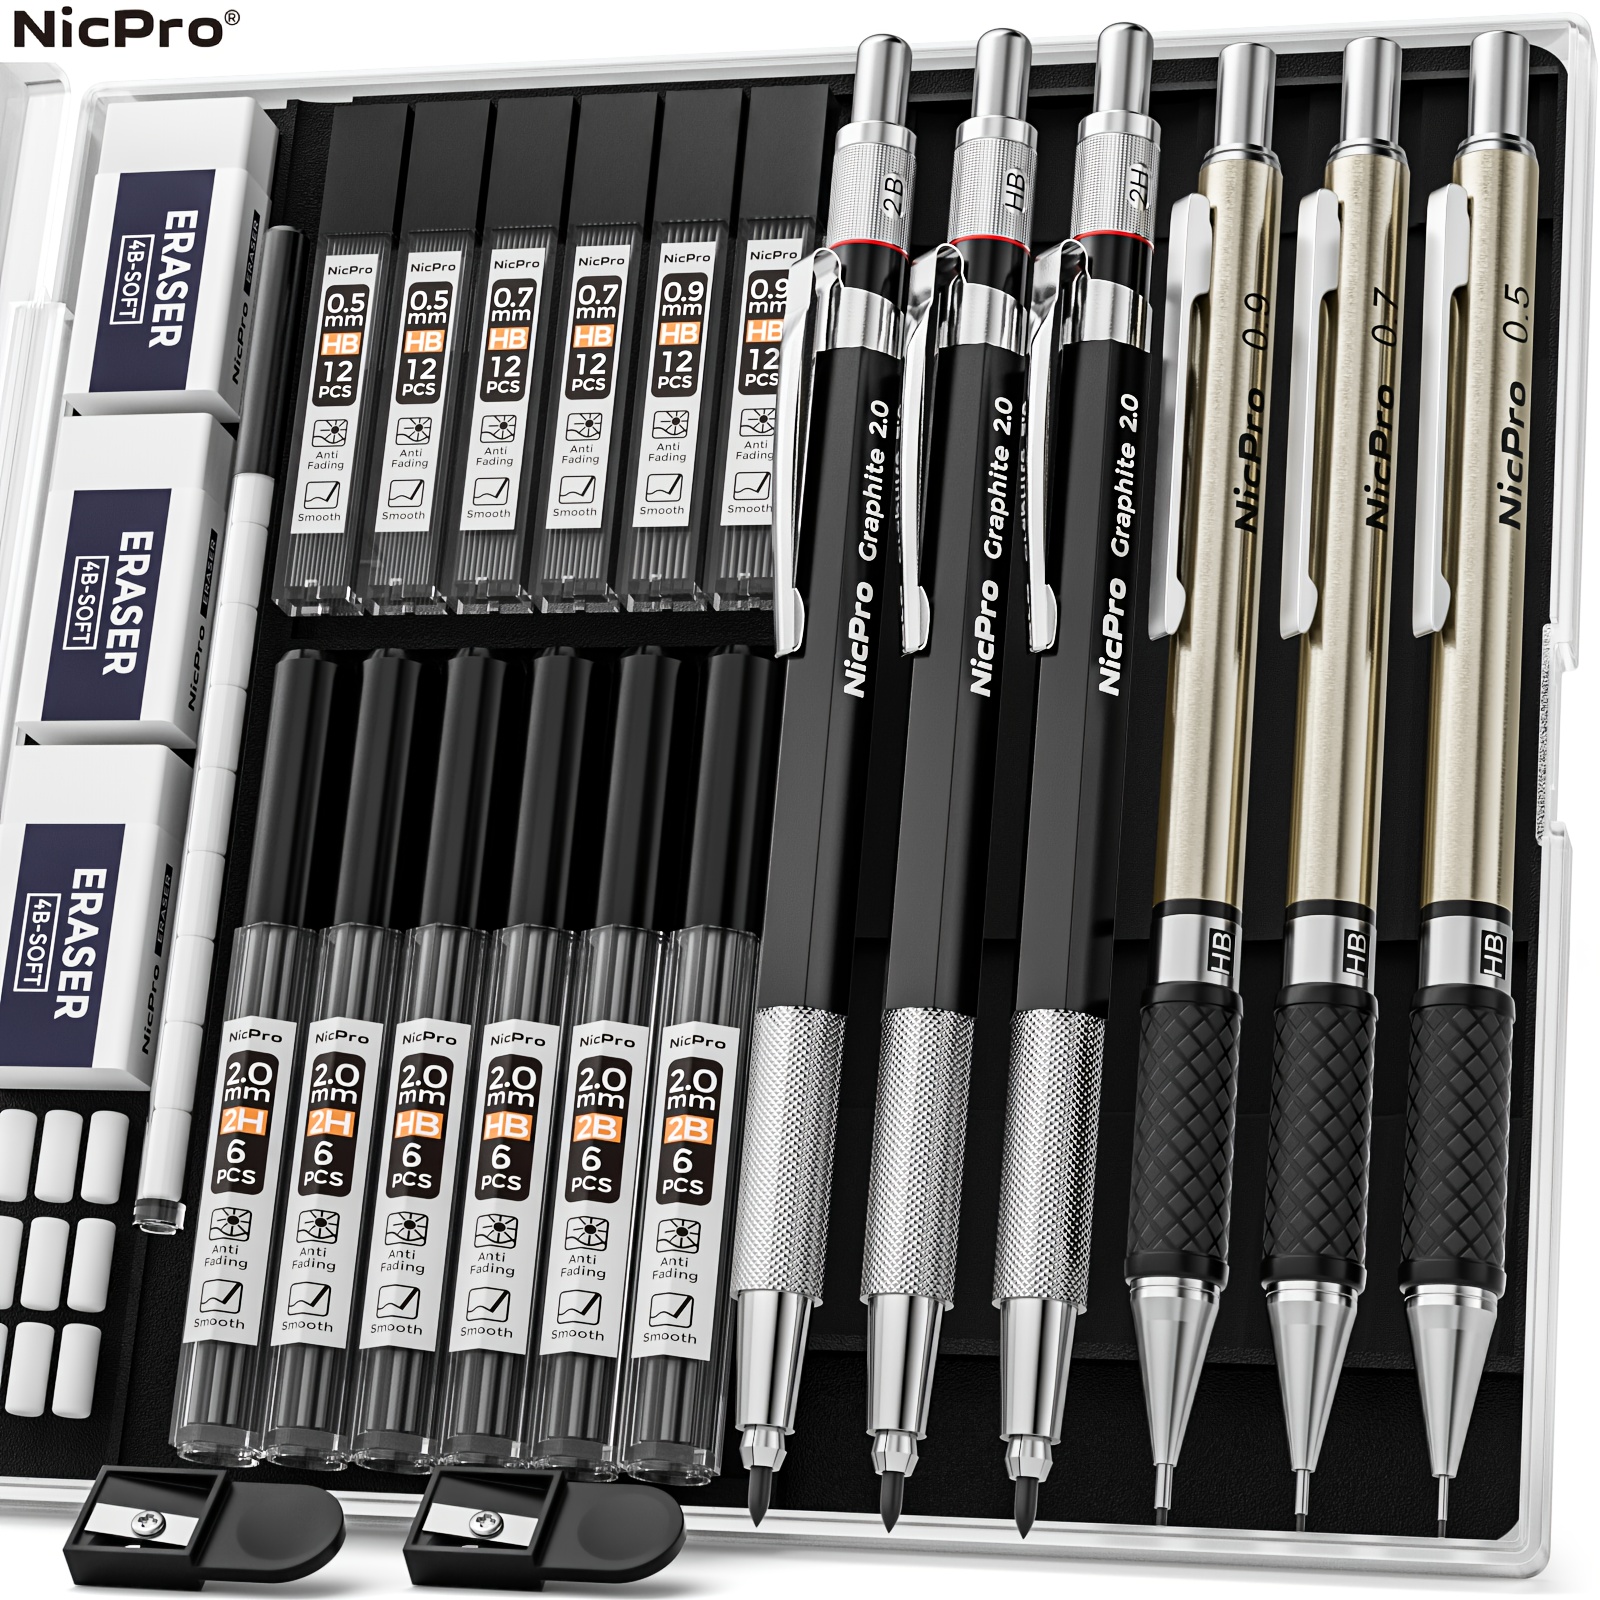 

6pcs Art Mechanical Pencil Set, 3pcs Metal Drafting Pencil 0.5 Mm & 0.7 Mm & 0.9 Mm & 3pcs 2mm Graphite Lead Holder (2b Hb 2h) For Writing, Sketching Drawing With Lead Refills Case